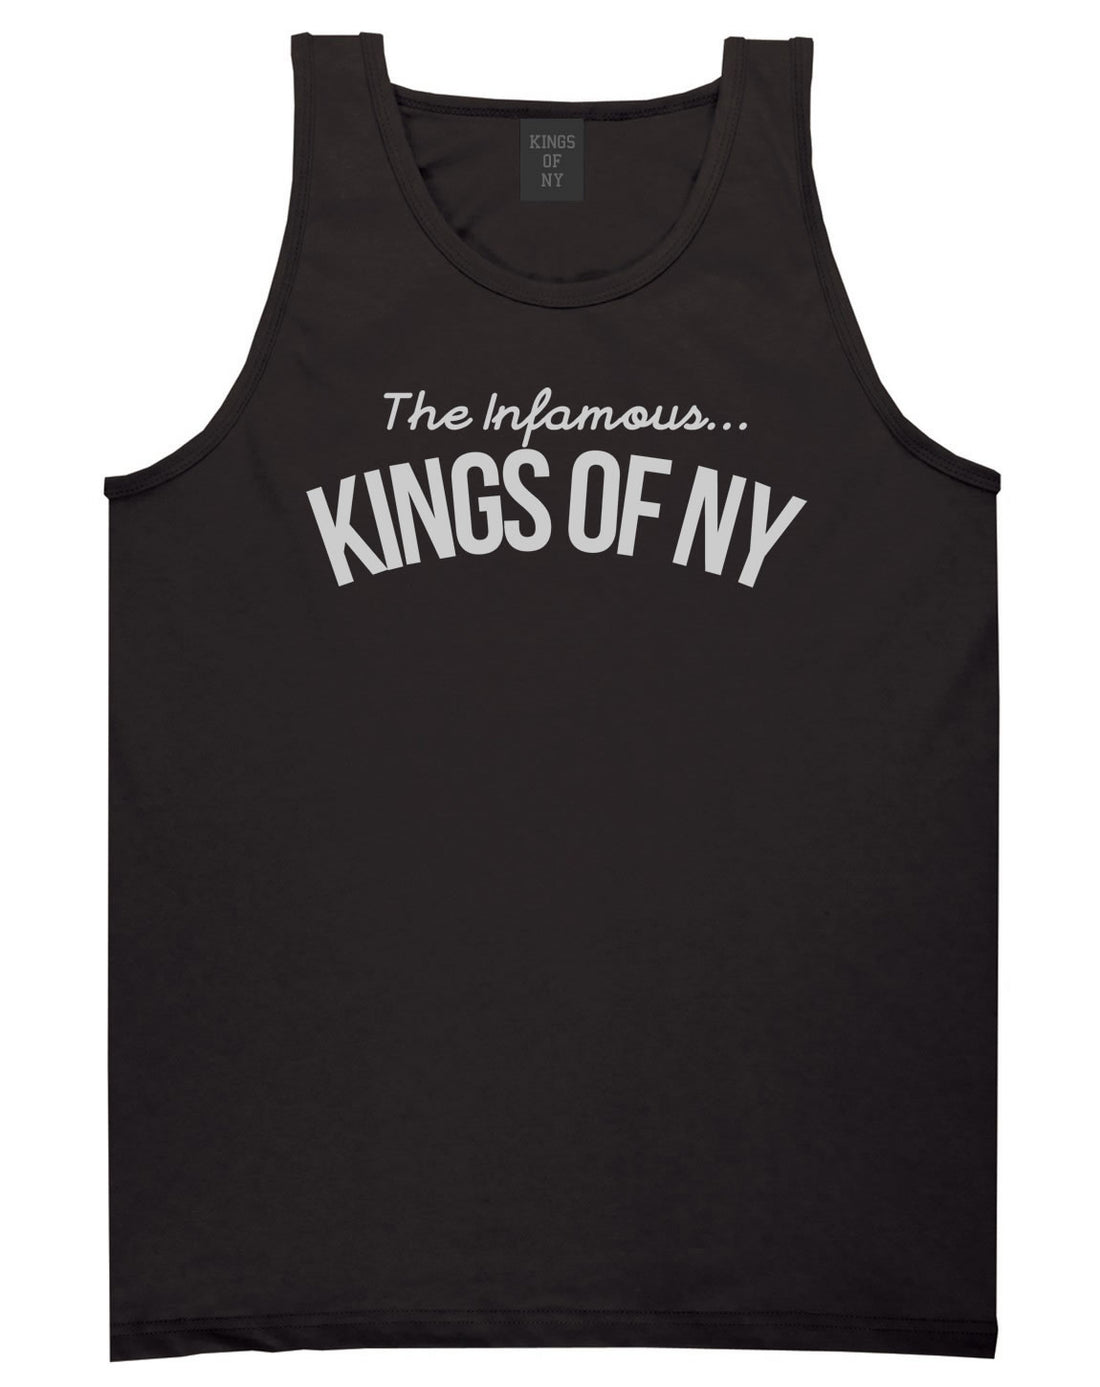 The Infamous Kings Of NY Tank Top in Black By Kings Of NY